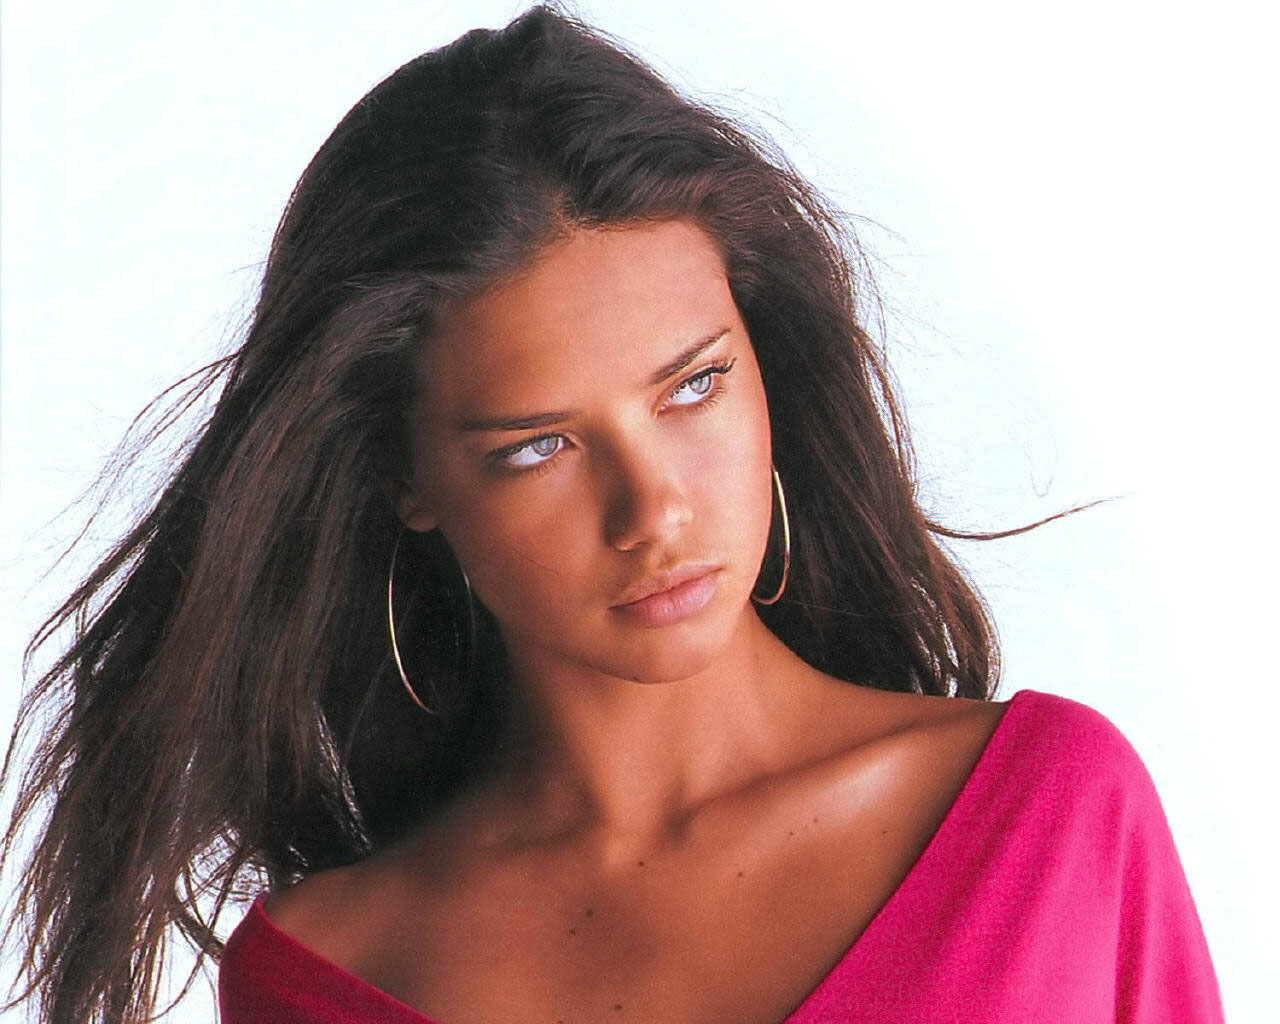 Best Wallpaper Name: Adriana Lima HD Wallpapers In Pink Shart Tags ...